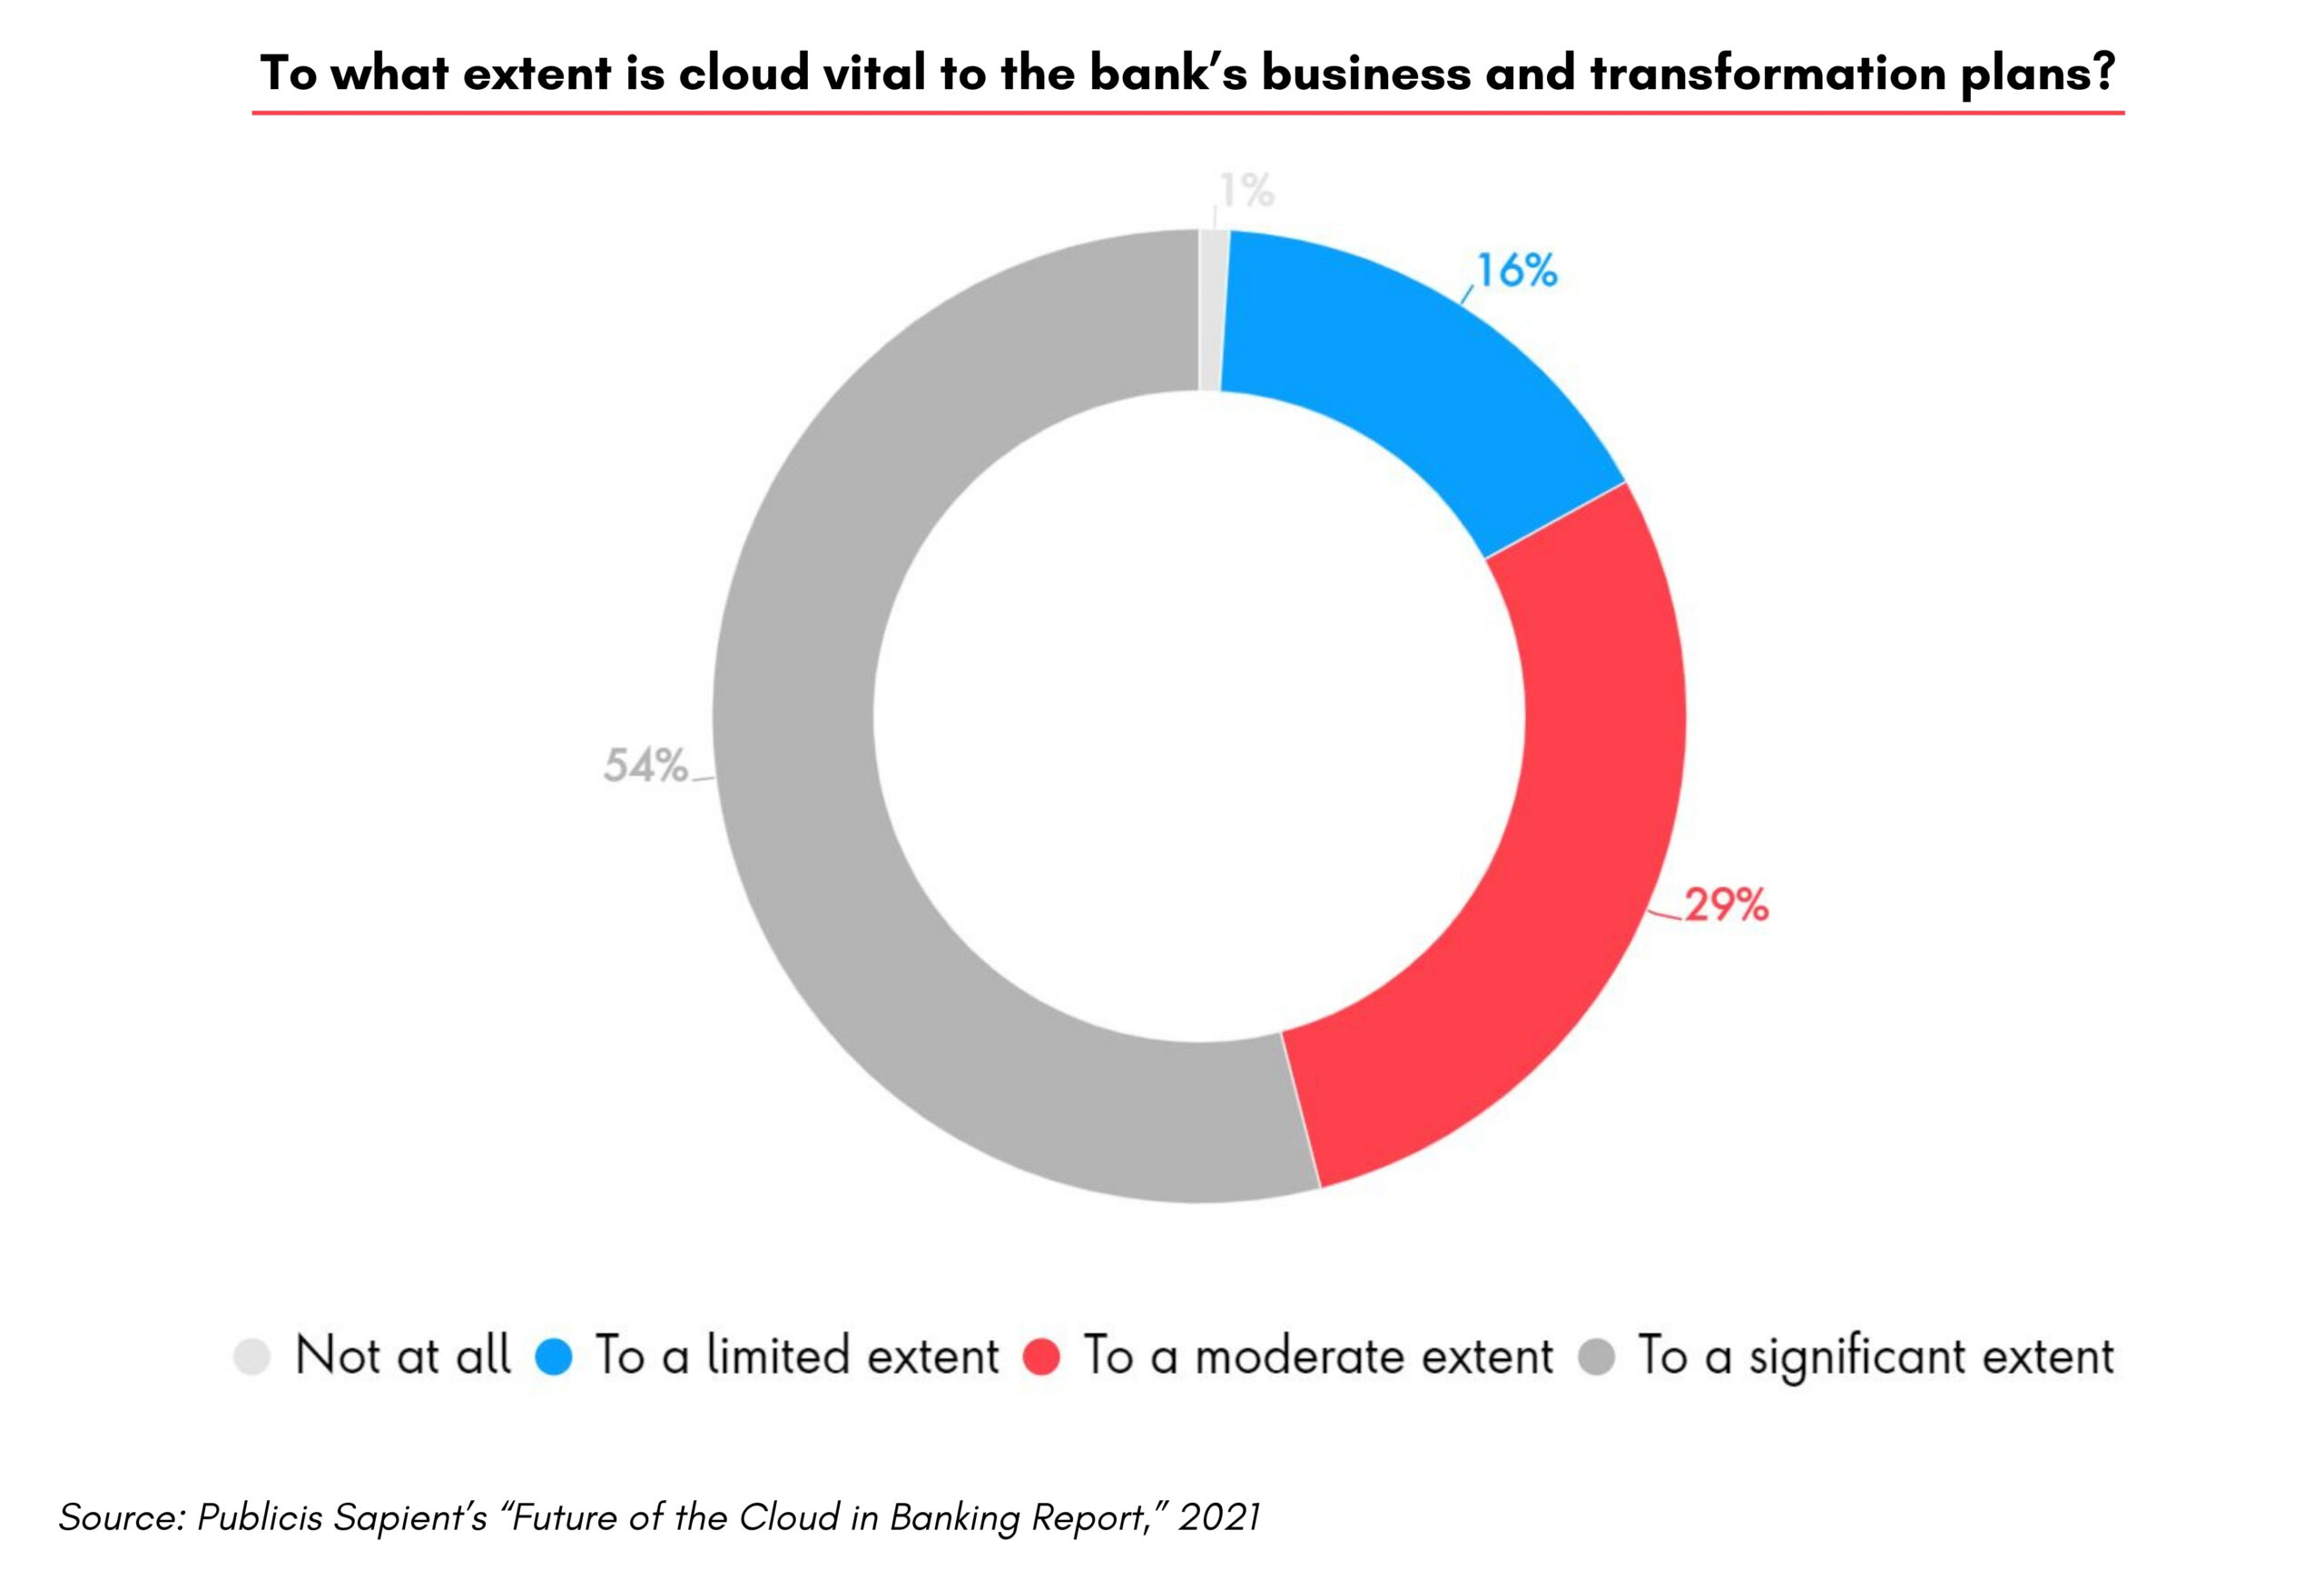 A pie chart showing how banking leaders responded to the question, "to what extent is cloud vital to the bank’s business and transformation plans?"